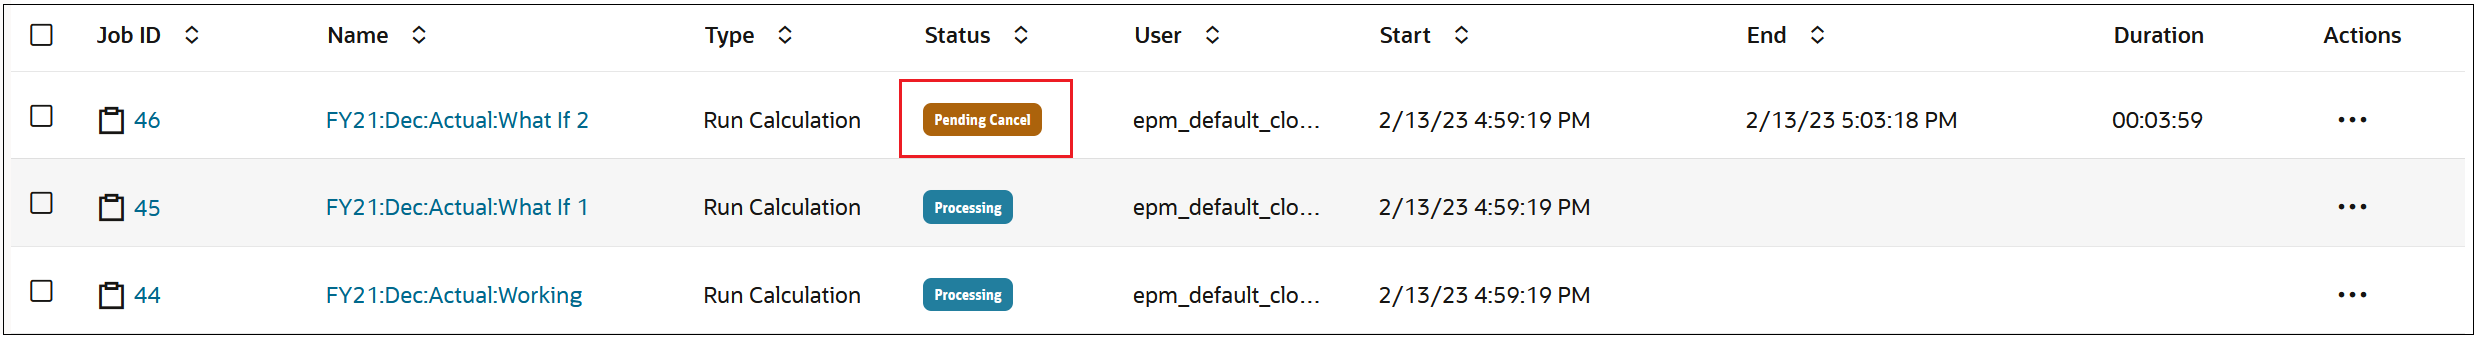 Jobs Console showing a job with a Pending Cancel status